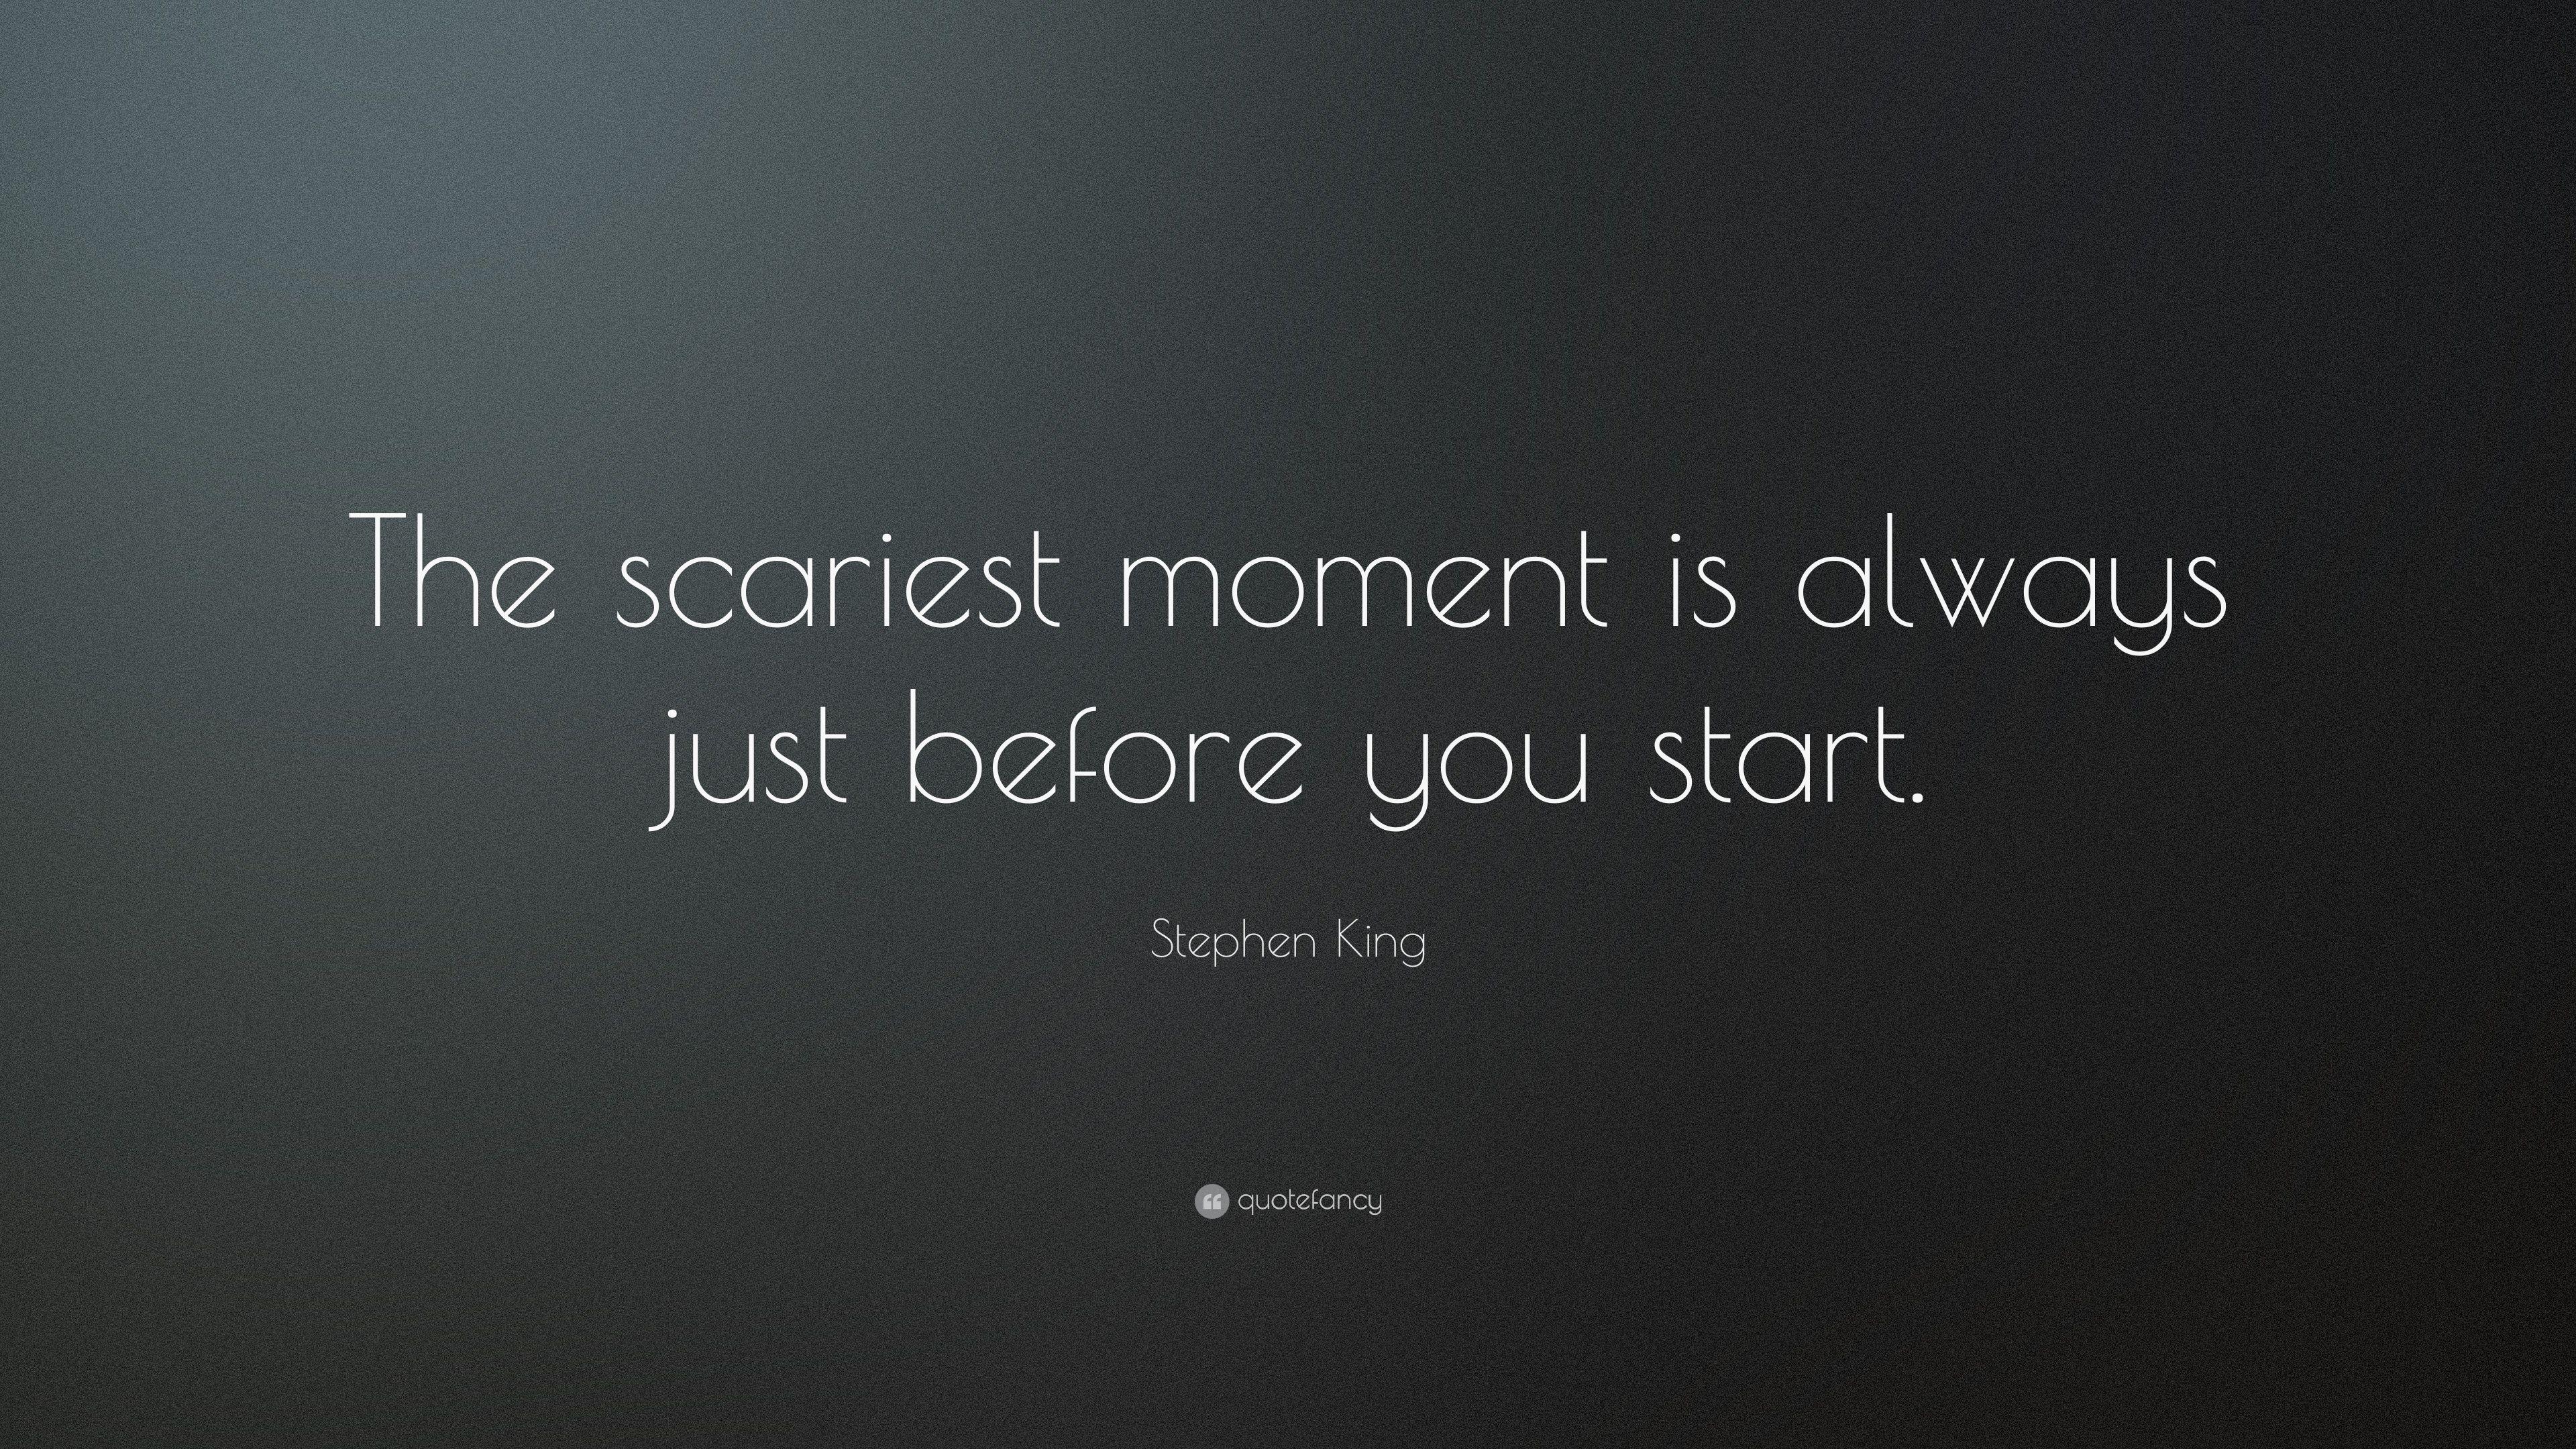 Stephen King Quote: “The scariest moment is always just before you